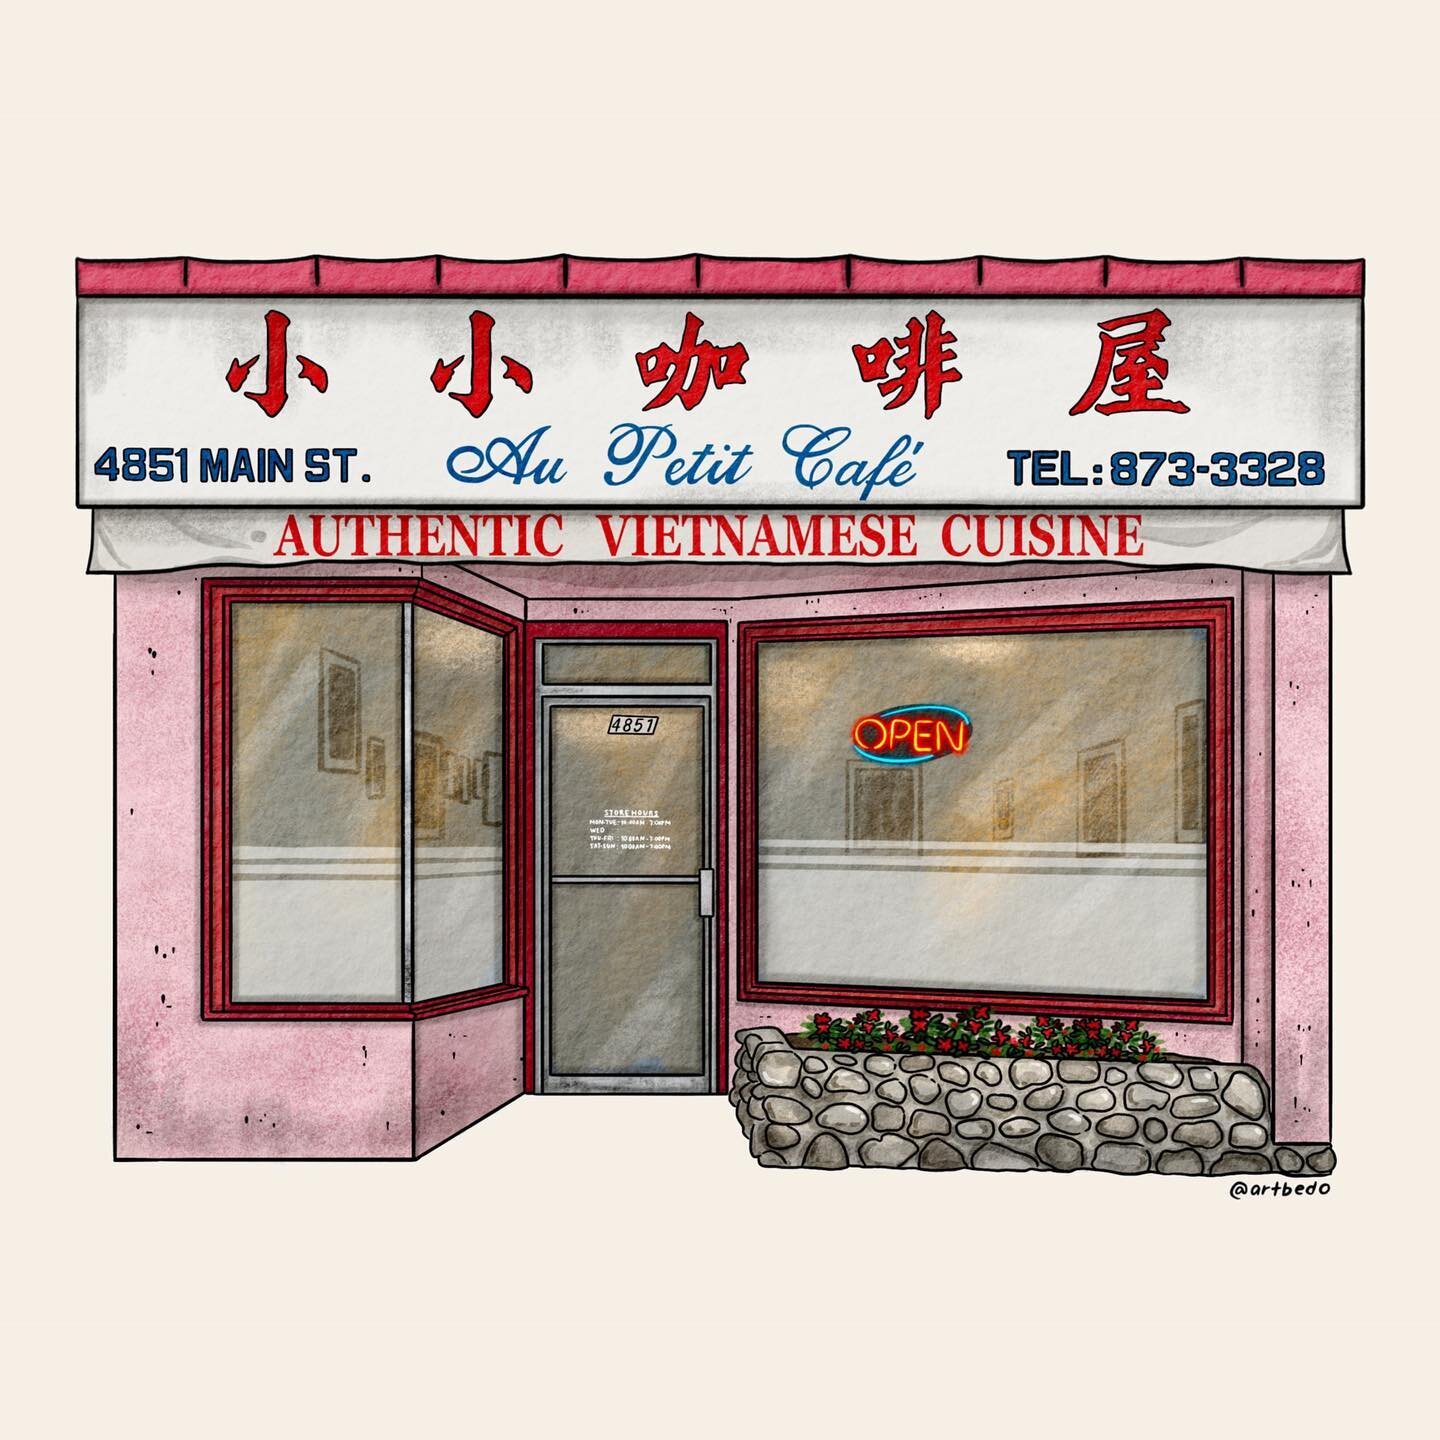 Au Petit Cafe on Main St. was my family&rsquo;s go-to Vietnamese restaurant. We loved everything on the menu - but always made sure to order their banh mi 🥪 After 25 years, they sadly closed its doors in the spring of 2020. 

Luckily, their memories